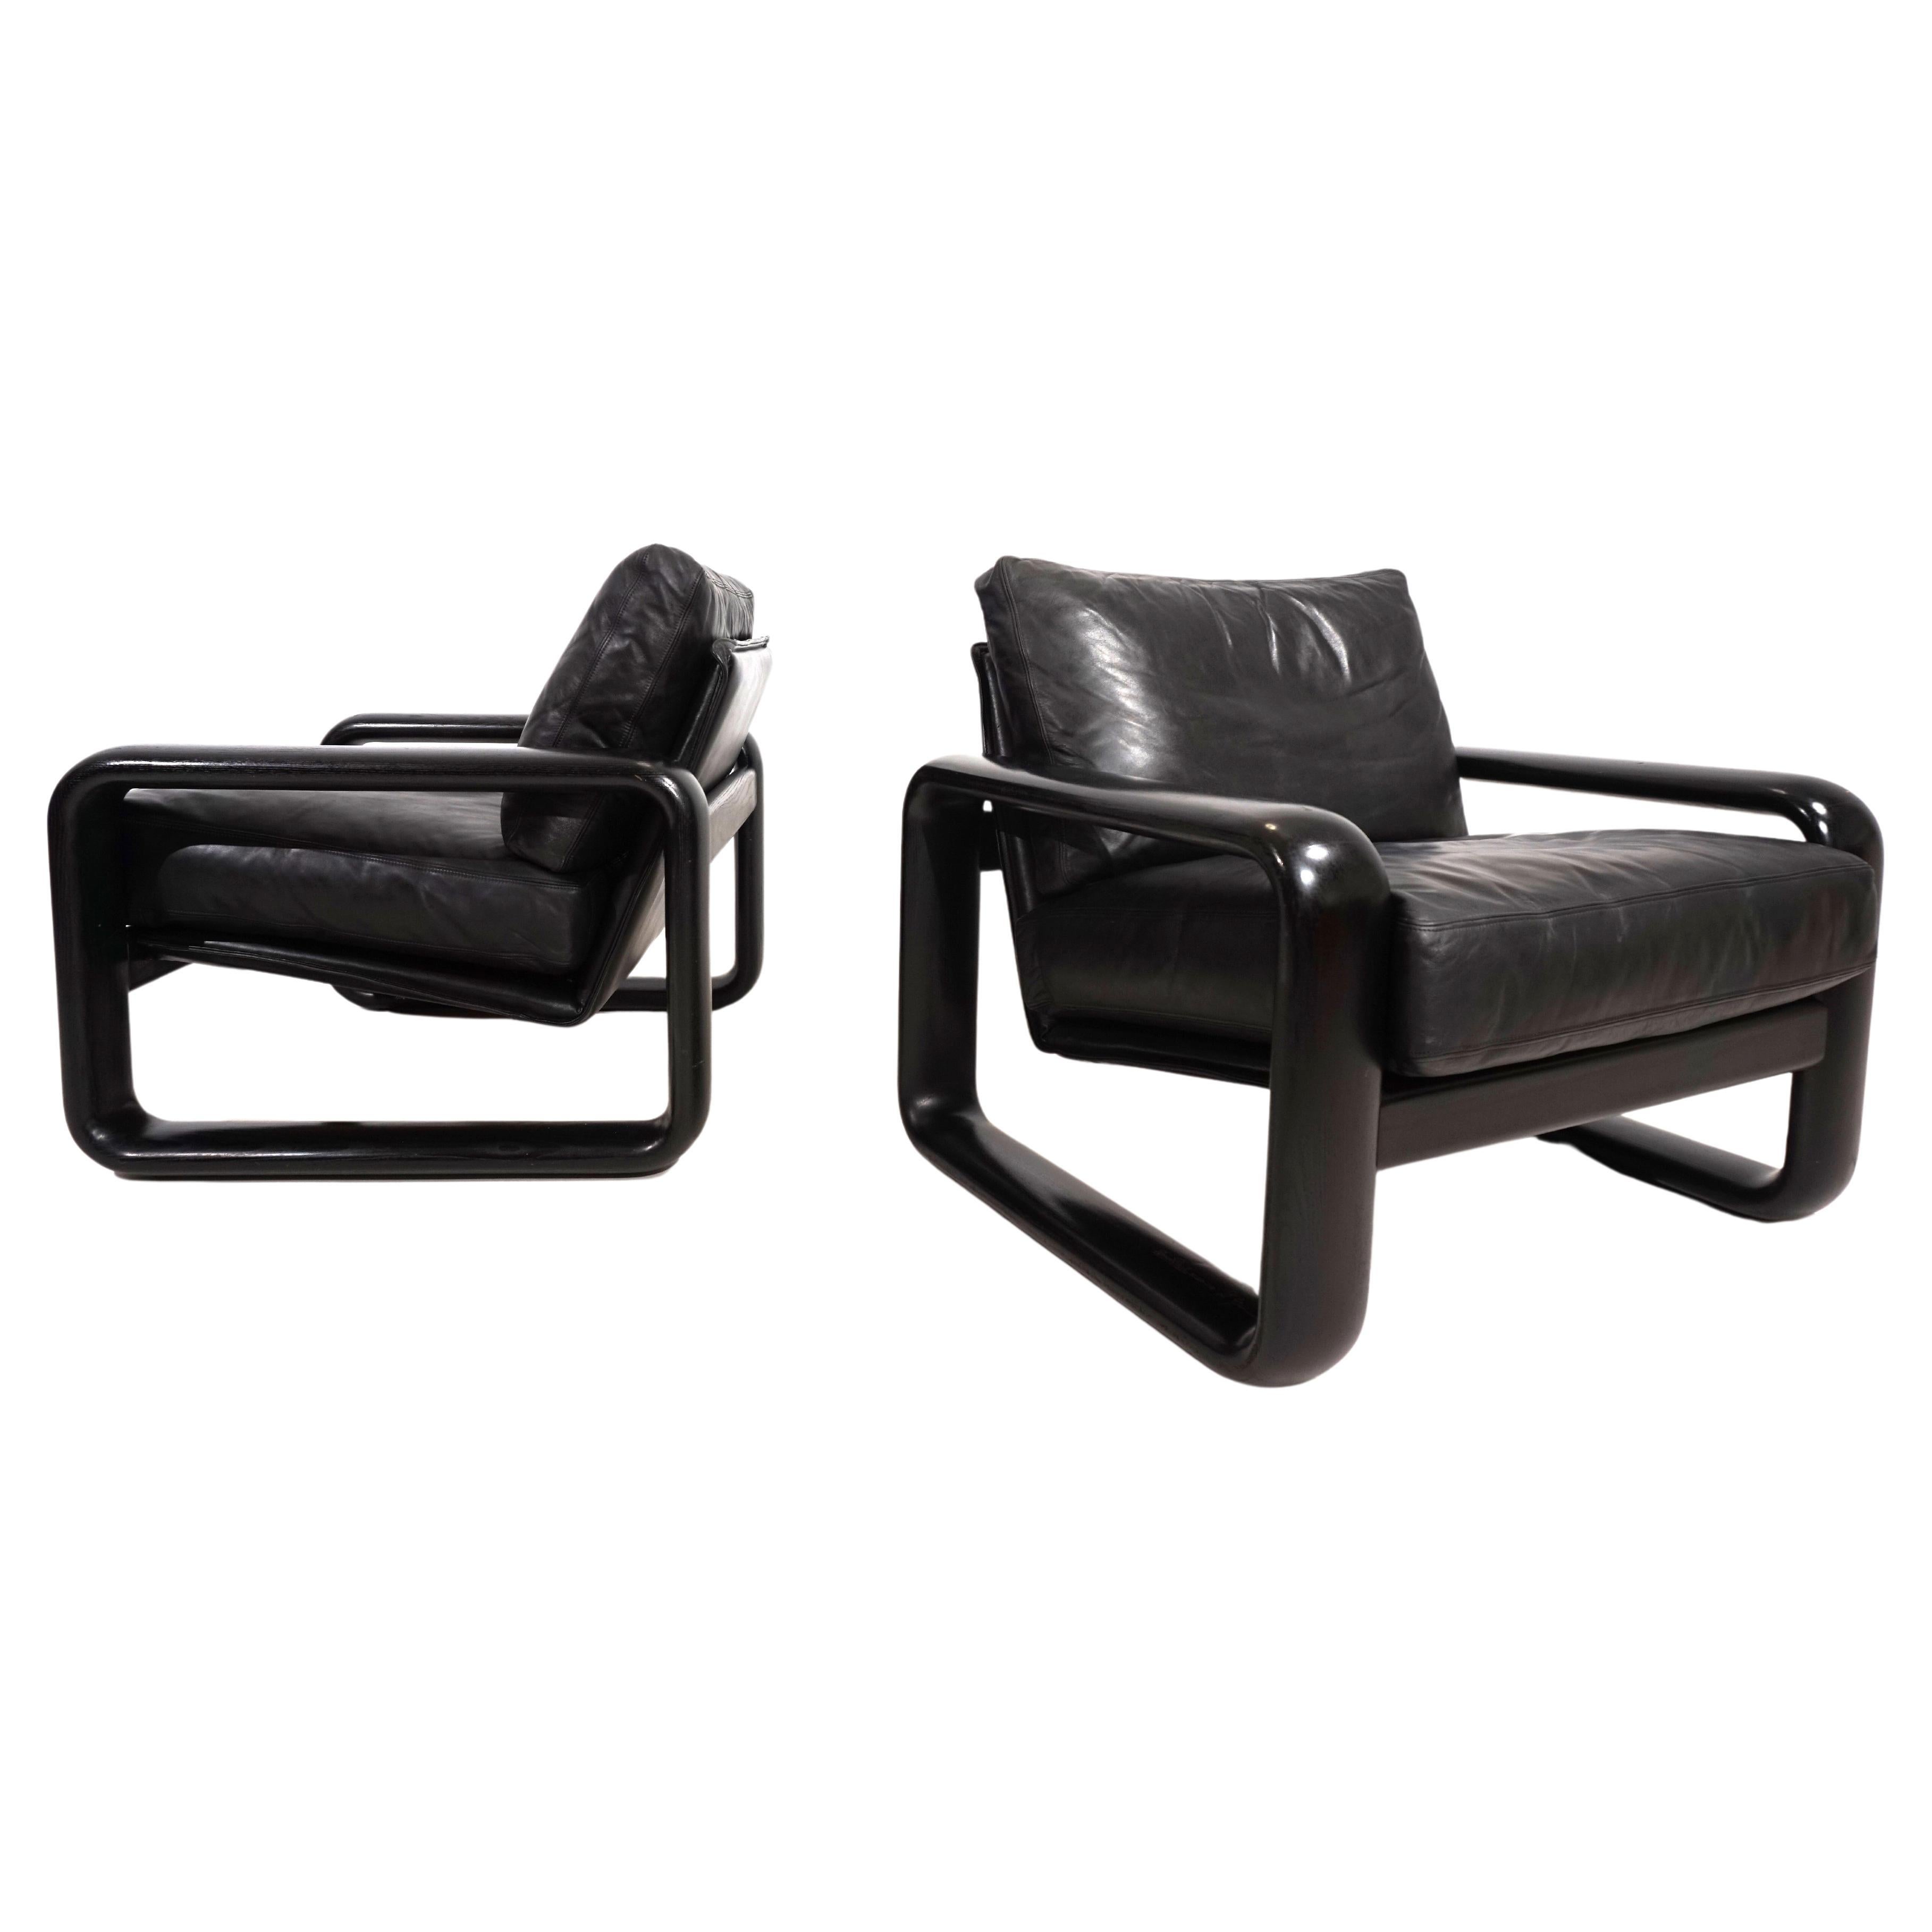 Set of 2 Rosenthal Hombre leather armchairs by Burkhard Vogtherr